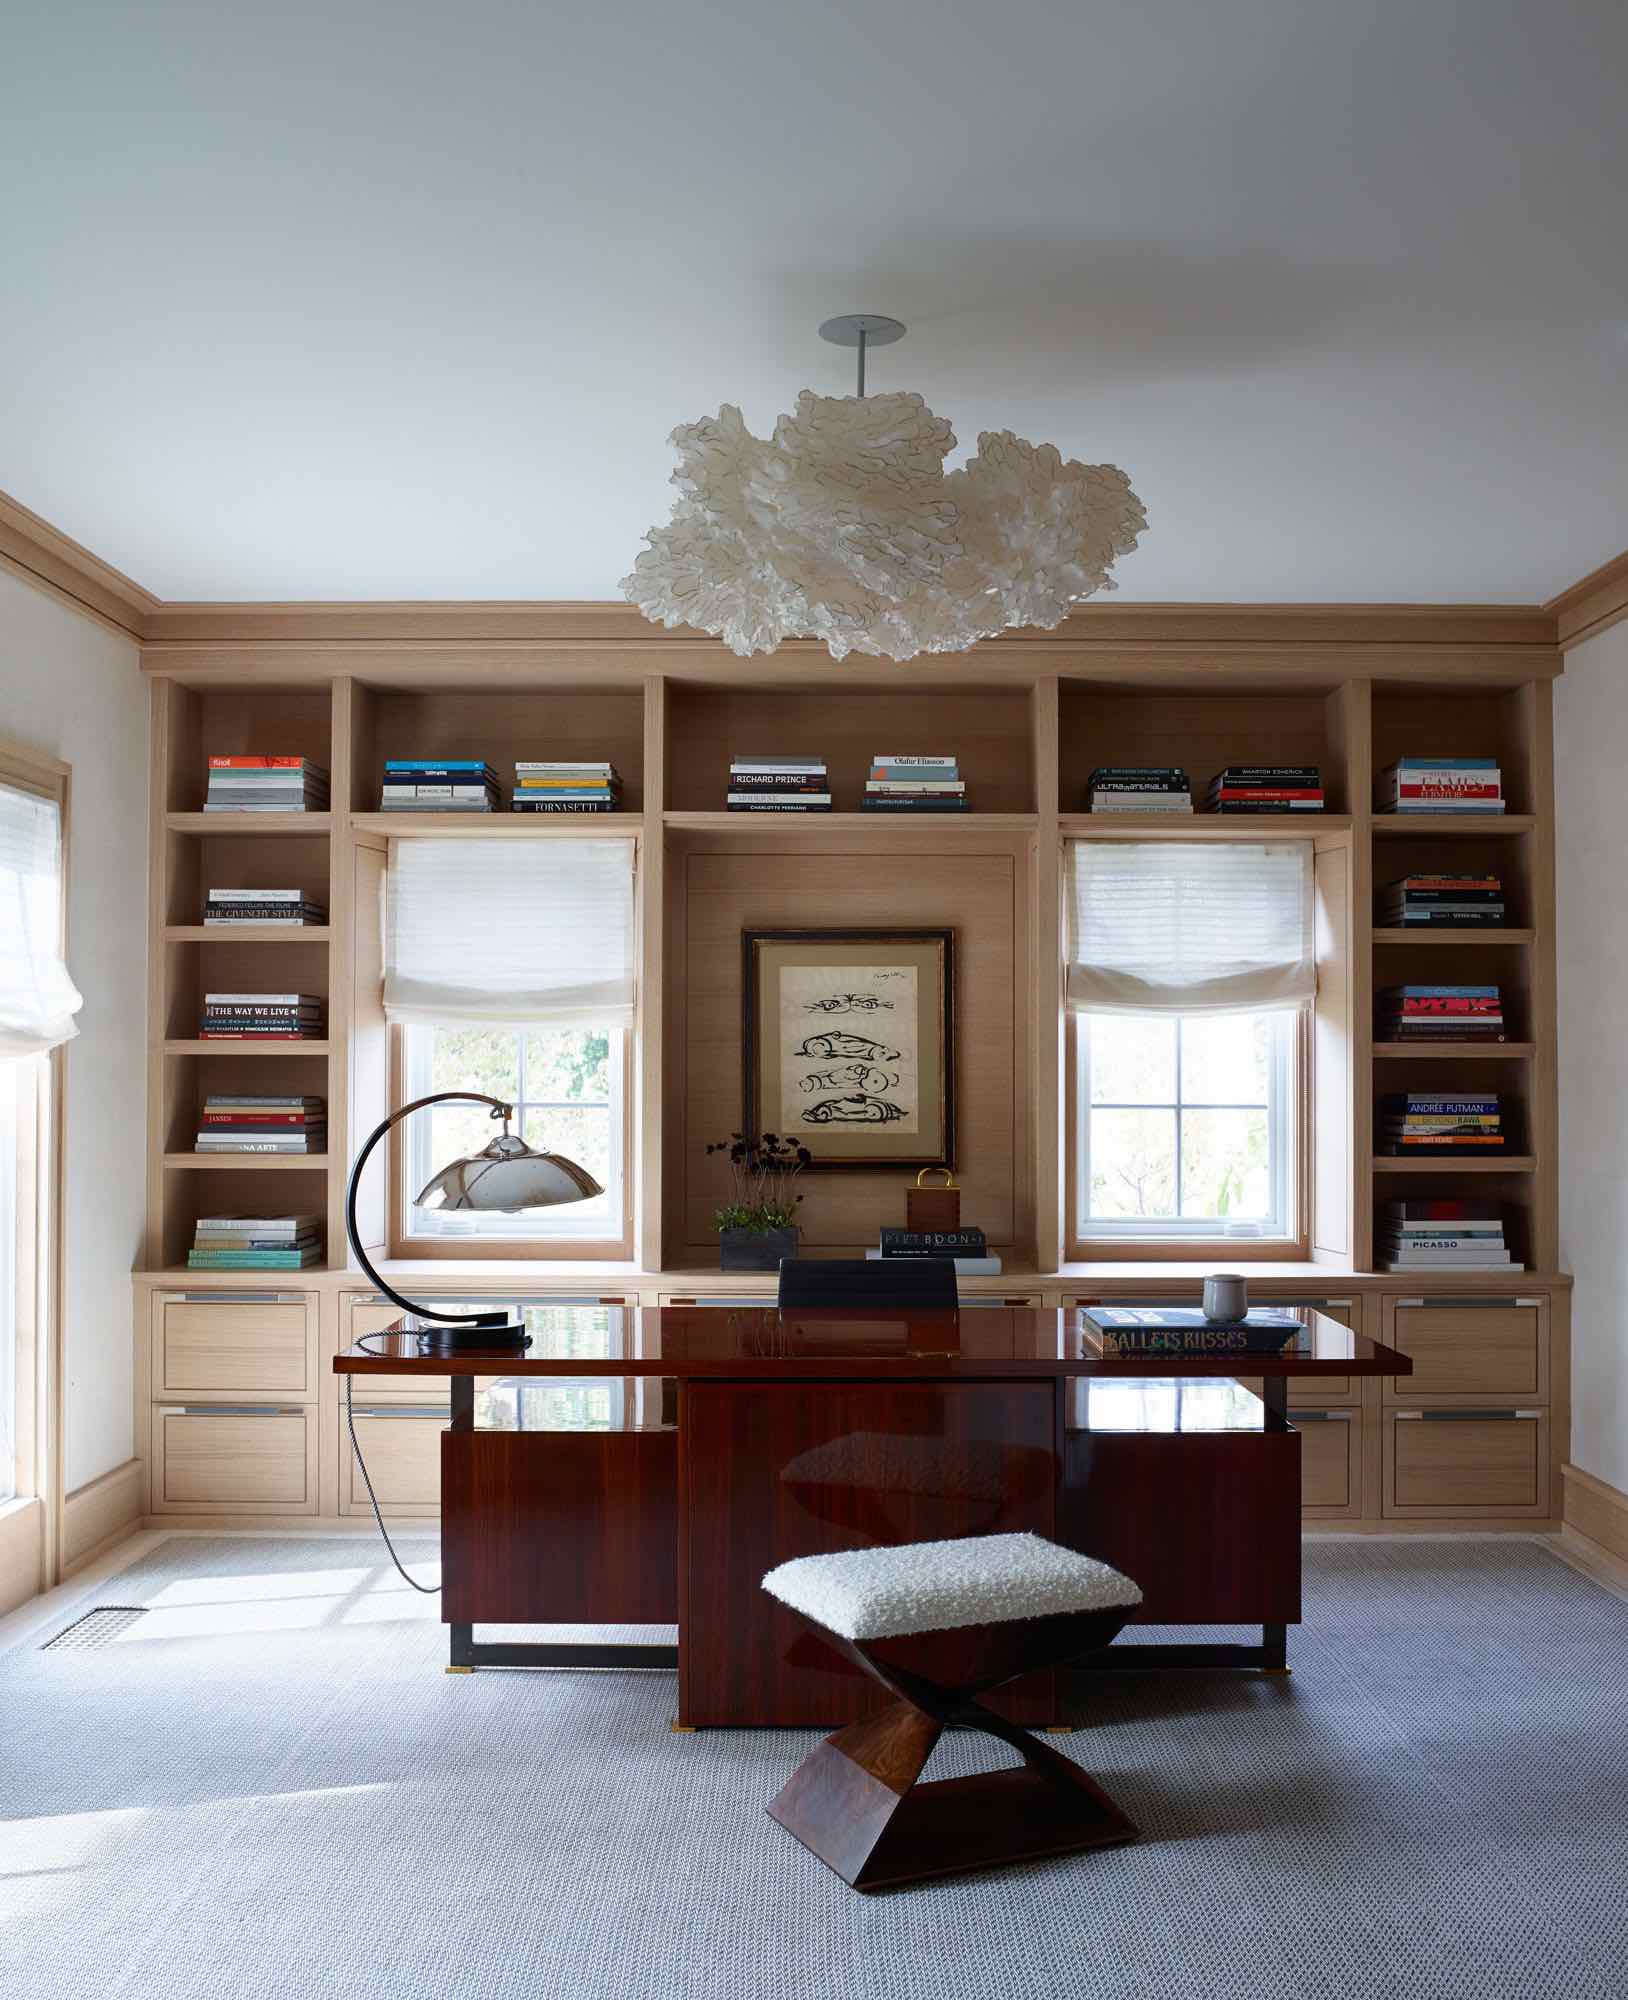 This image shows a library with custom designed oak millwork bookcases in this Bridgehampton home designed by Studio Carol Egan.  There is a ceiling light fixture called the "Cloud" by Ayala Serfaty that hangs over a Leleu Desk in Mahogany finish.  On the custom oak millwork bookcases are leather upholstered cabinet drawer pulls by Holland & Sherry.  In the foreground is an X bench in a walnut finish designed by Studio Carol Egan.  There is a custom woven area rug in the library by Elizabeth Eakins.